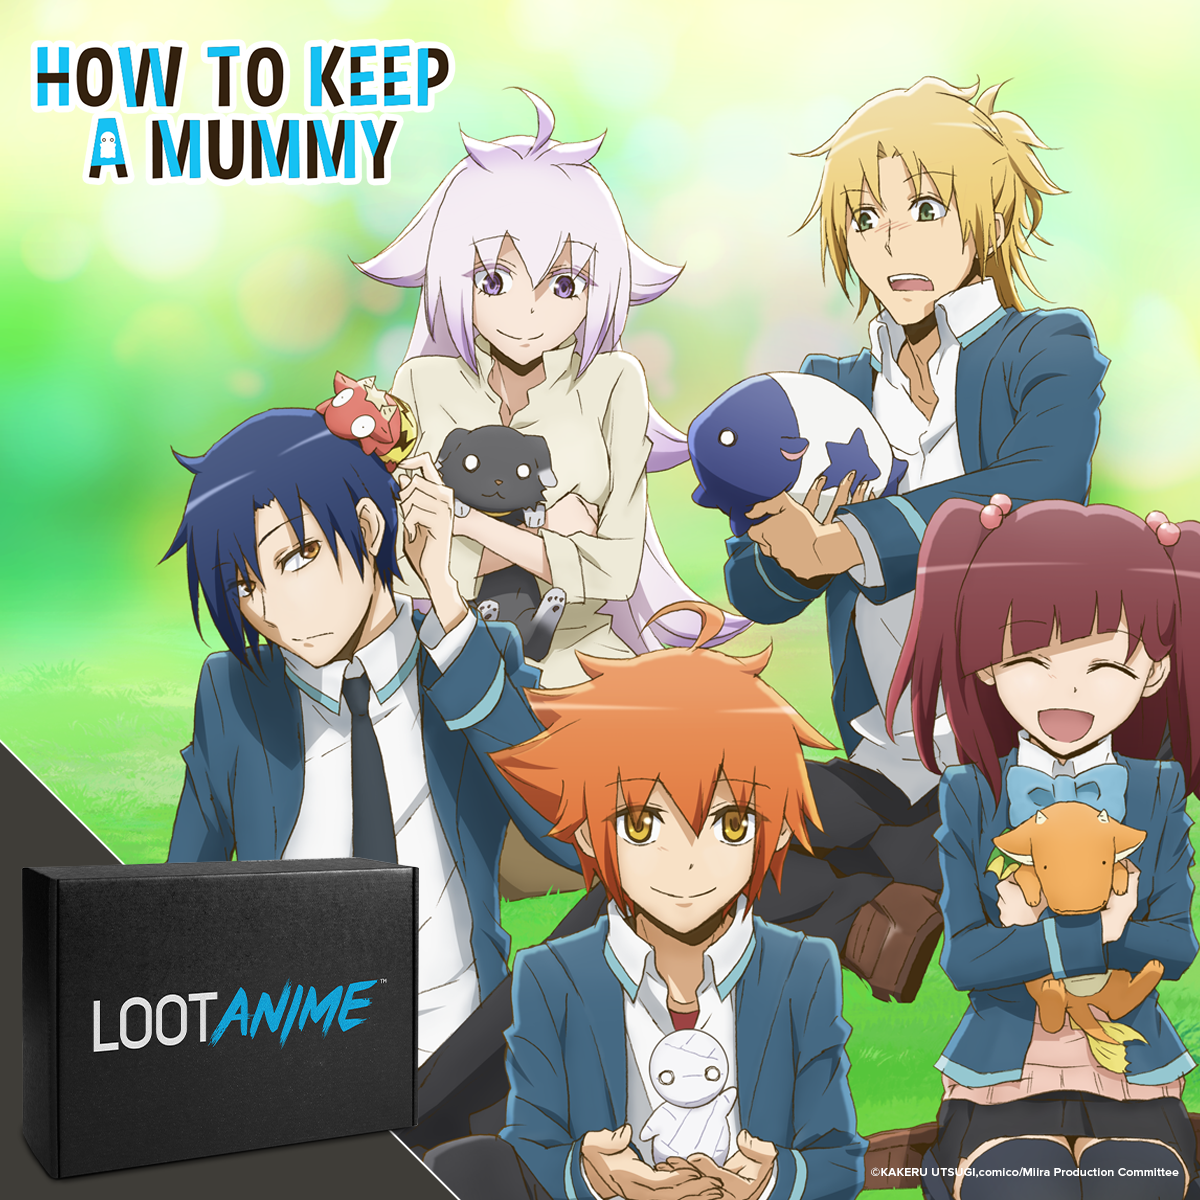 The Daily Crate | ANIME: Let's Talk Loot Anime's 